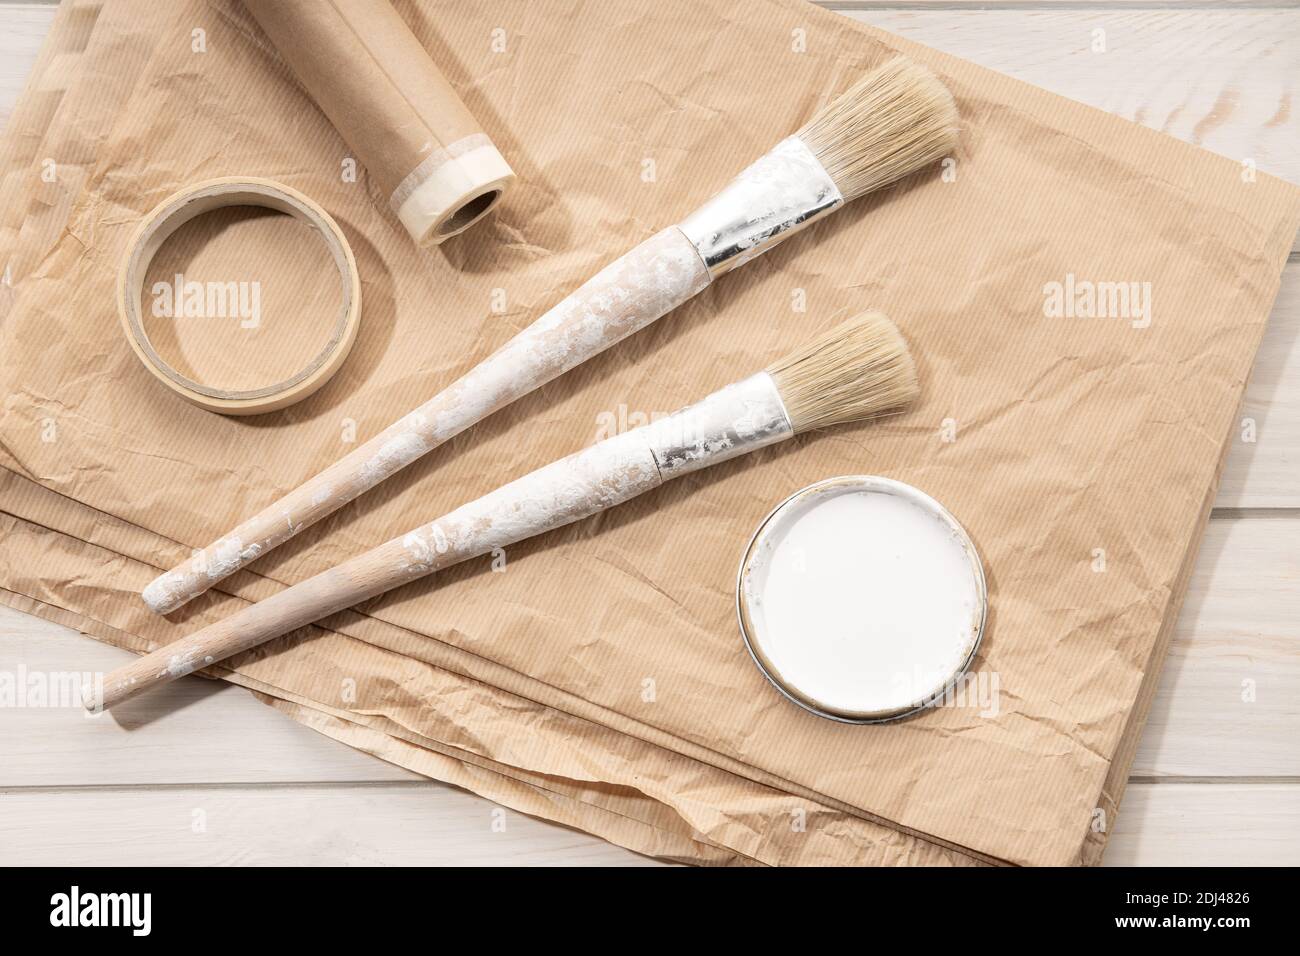 Set of painting tools brushes, masking tape, paper. DIY Home Improvement Paint. Top view Stock Photo